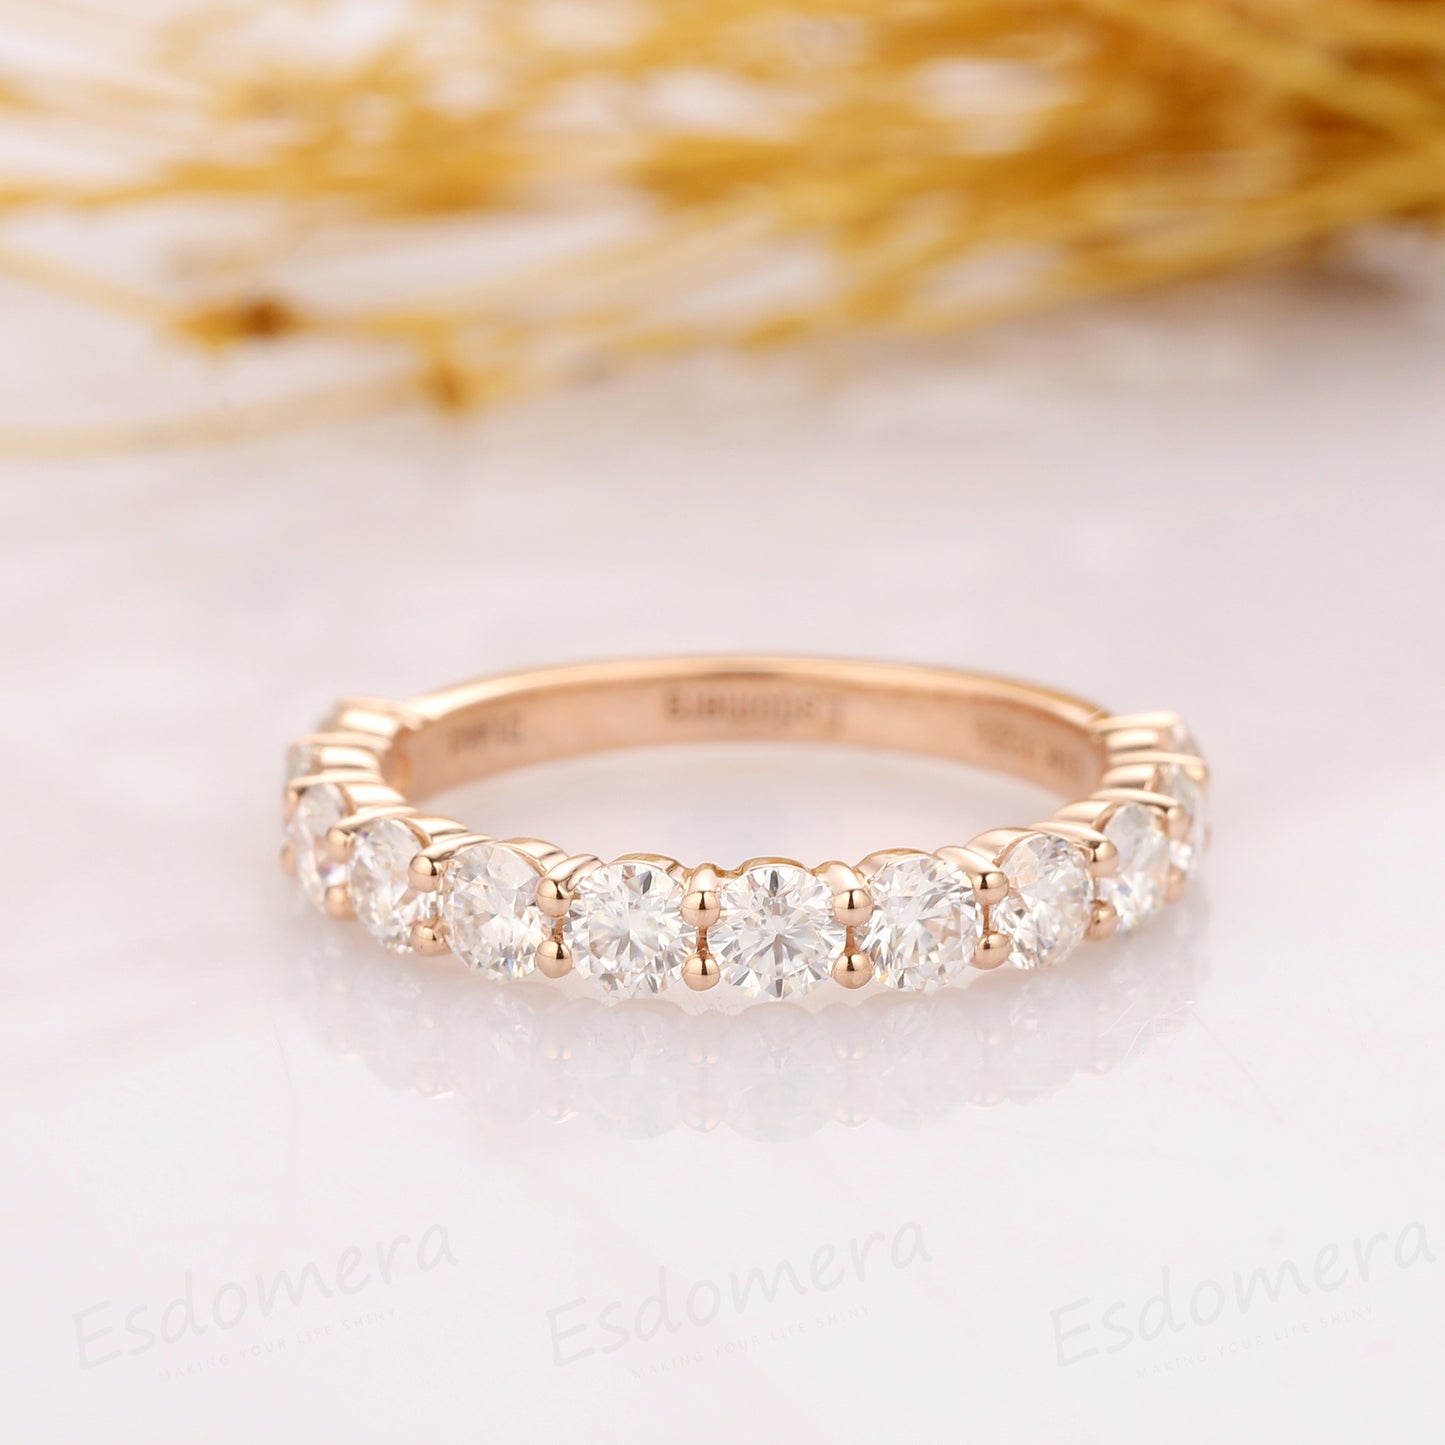 Moissanite Band, Classic 1.44ctw Round Moissanite, 12 Stone Wedding Band, Accents 14k Solid Gold Moissanite Wedding Ring